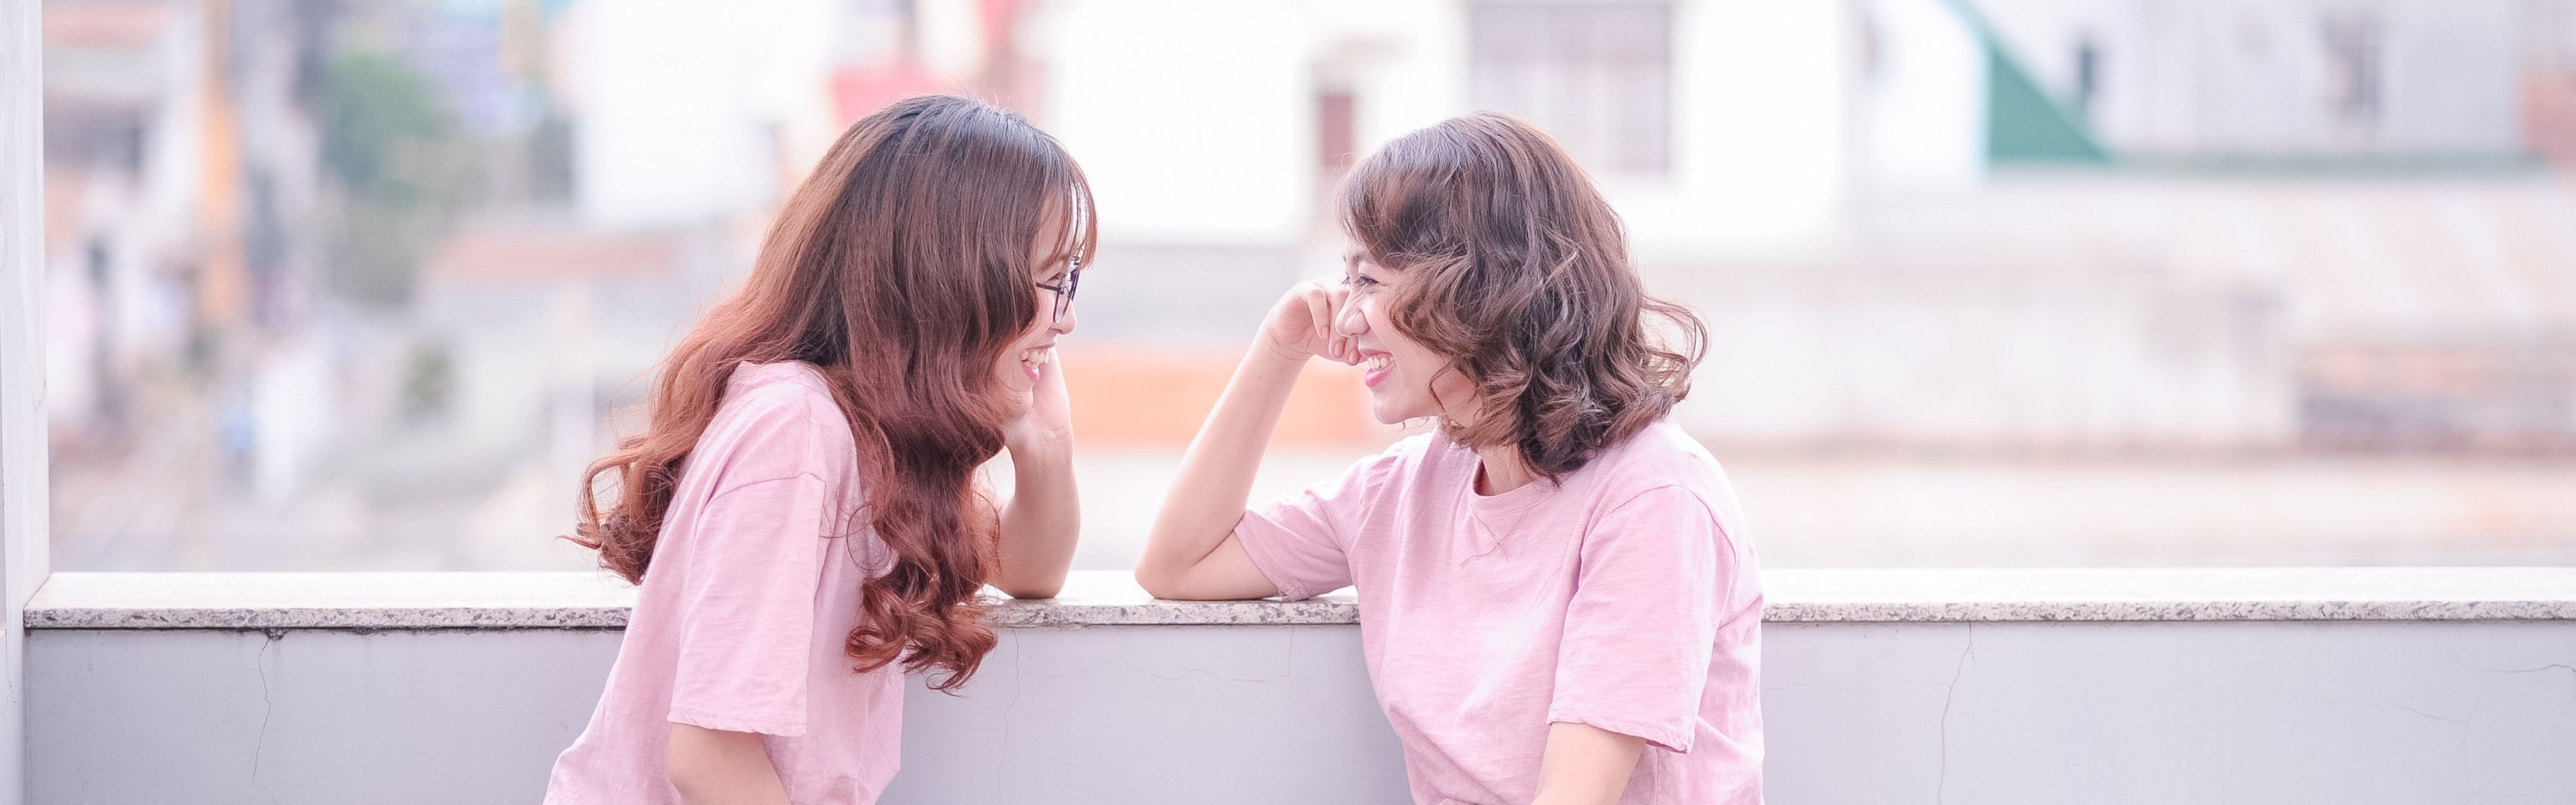 Two similar girls in pink shirts laughing at each other, illustrating testing only one variable in Facebook ads